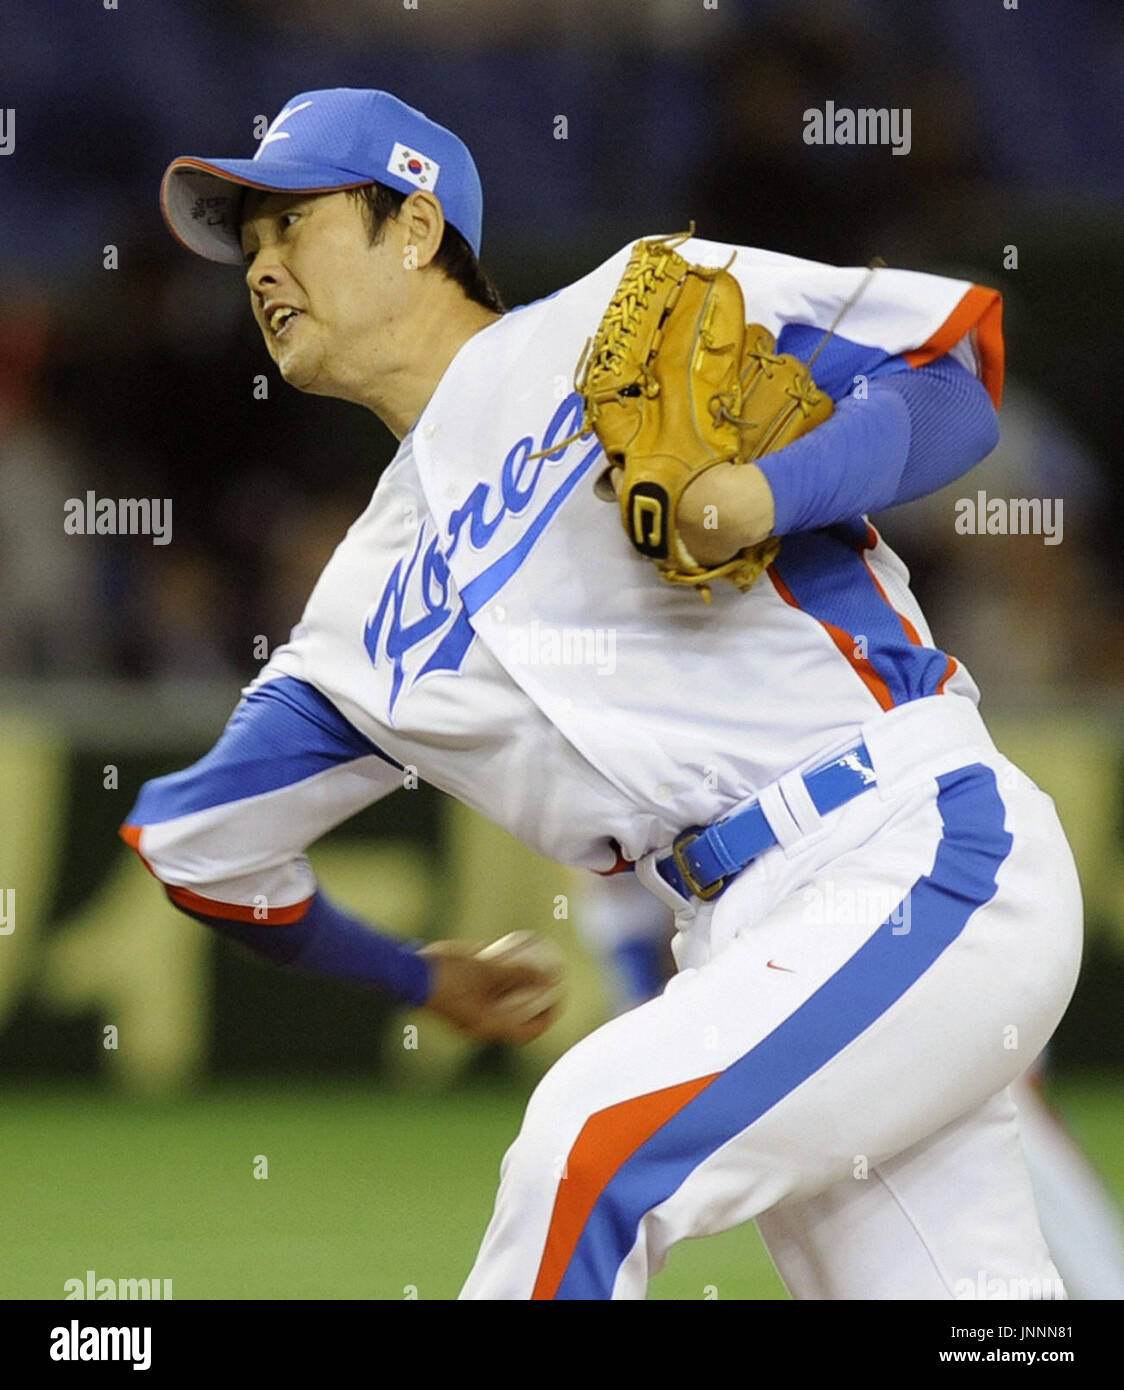 TOKYO, Japan - Chong Tae Hyon of the South Korean national team for the  World Baseball Classic pitches in a warm-up game with Japanese club Yomiuri  Giants at Tokyo Dome on March